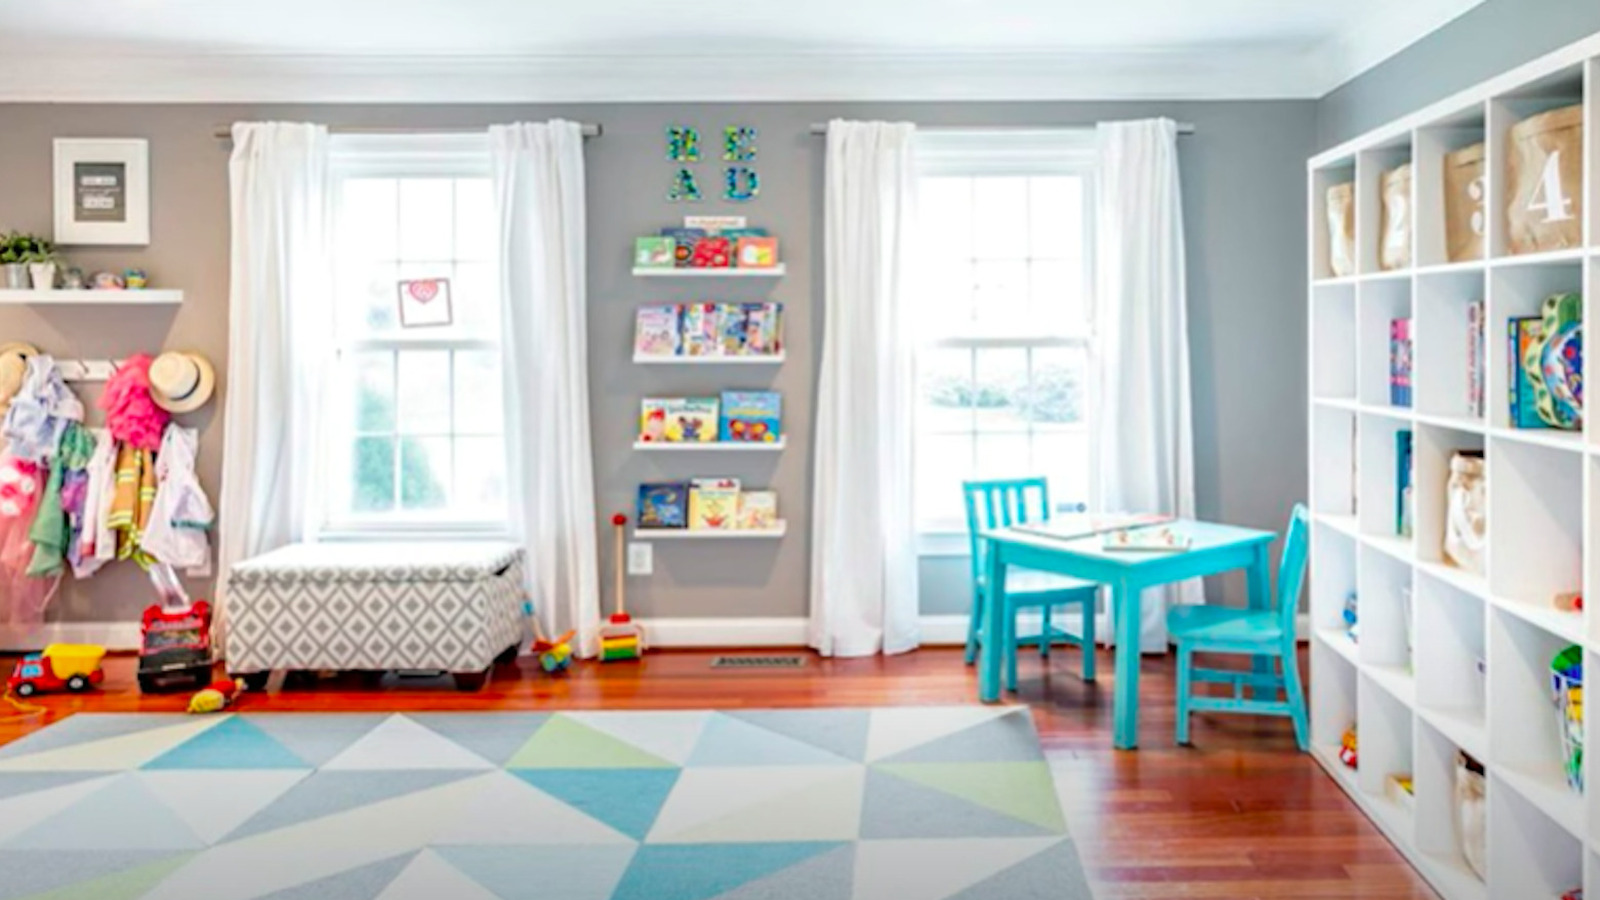 This inspired playroom tip might just convince you that your home's layout can change for the better